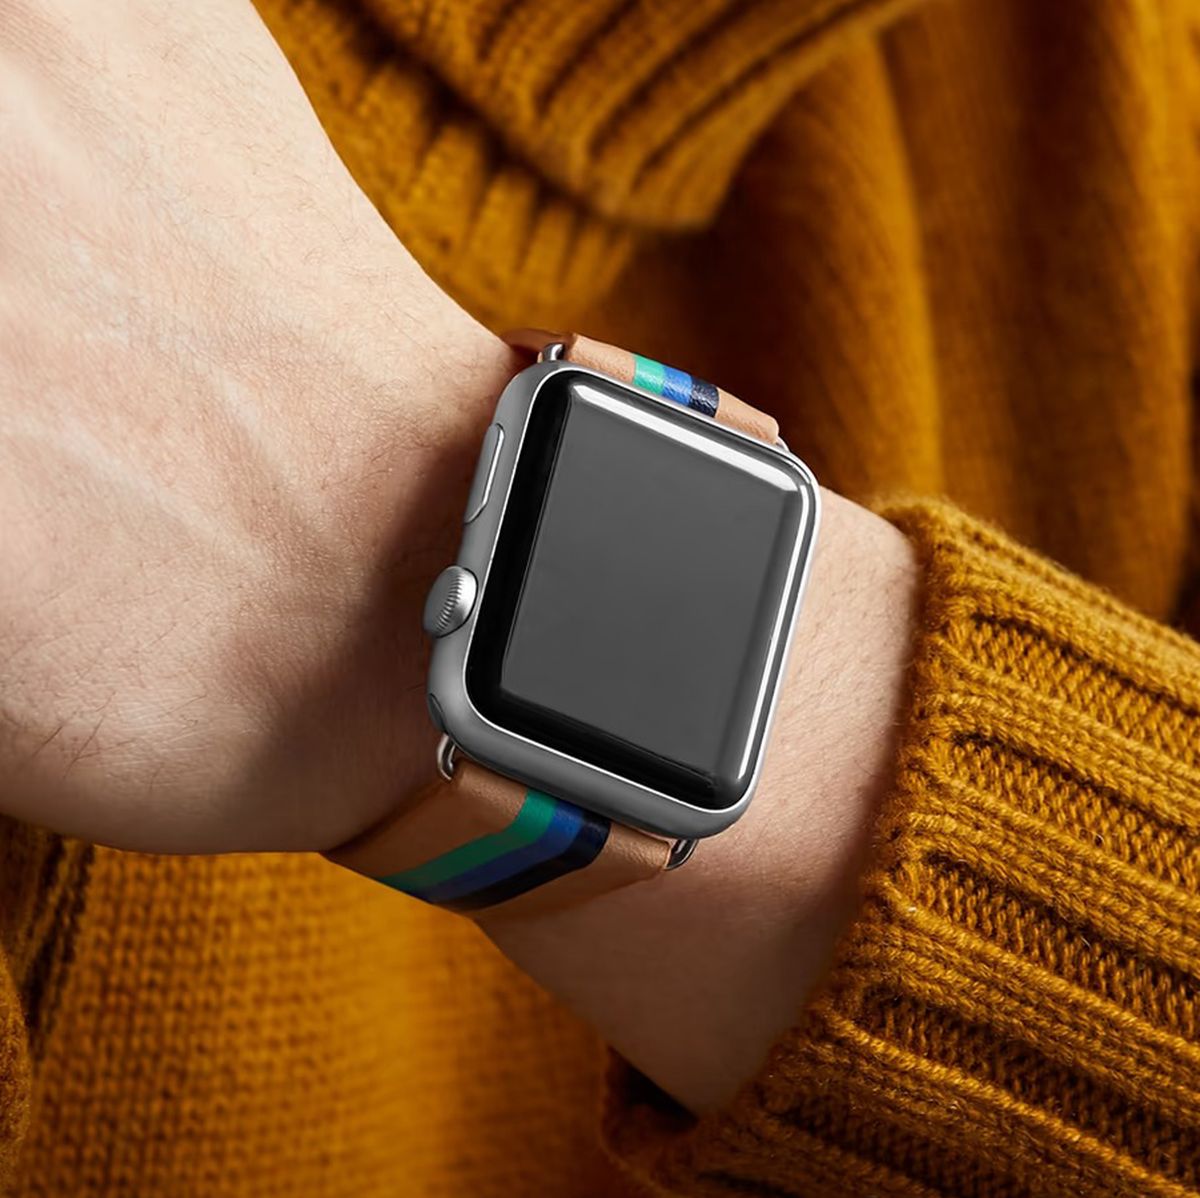 Luxury Apple Watch Bands to Upgrade Your Gadgetry Game